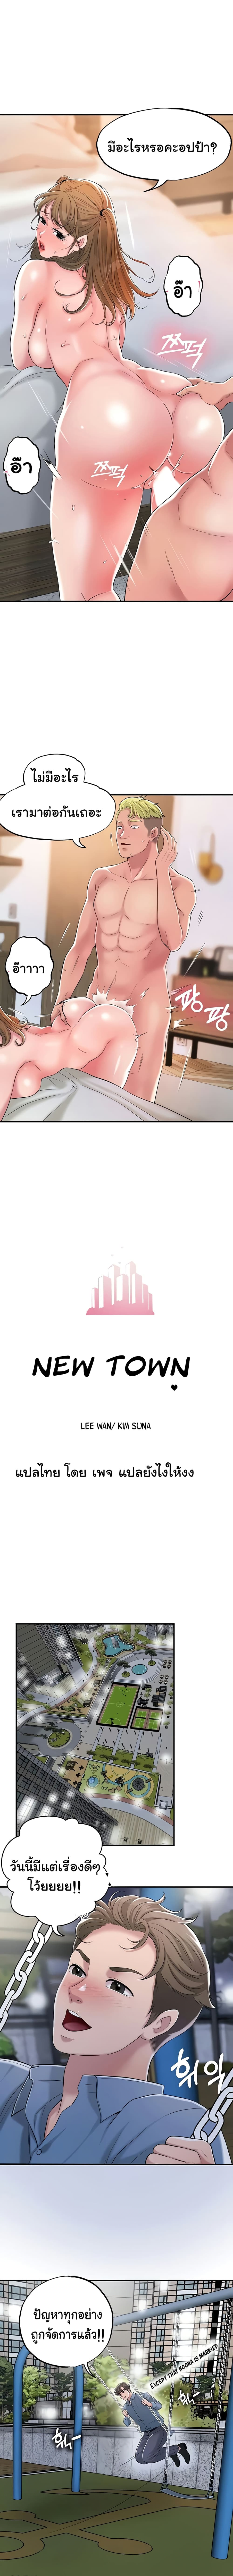 New Town 9-9